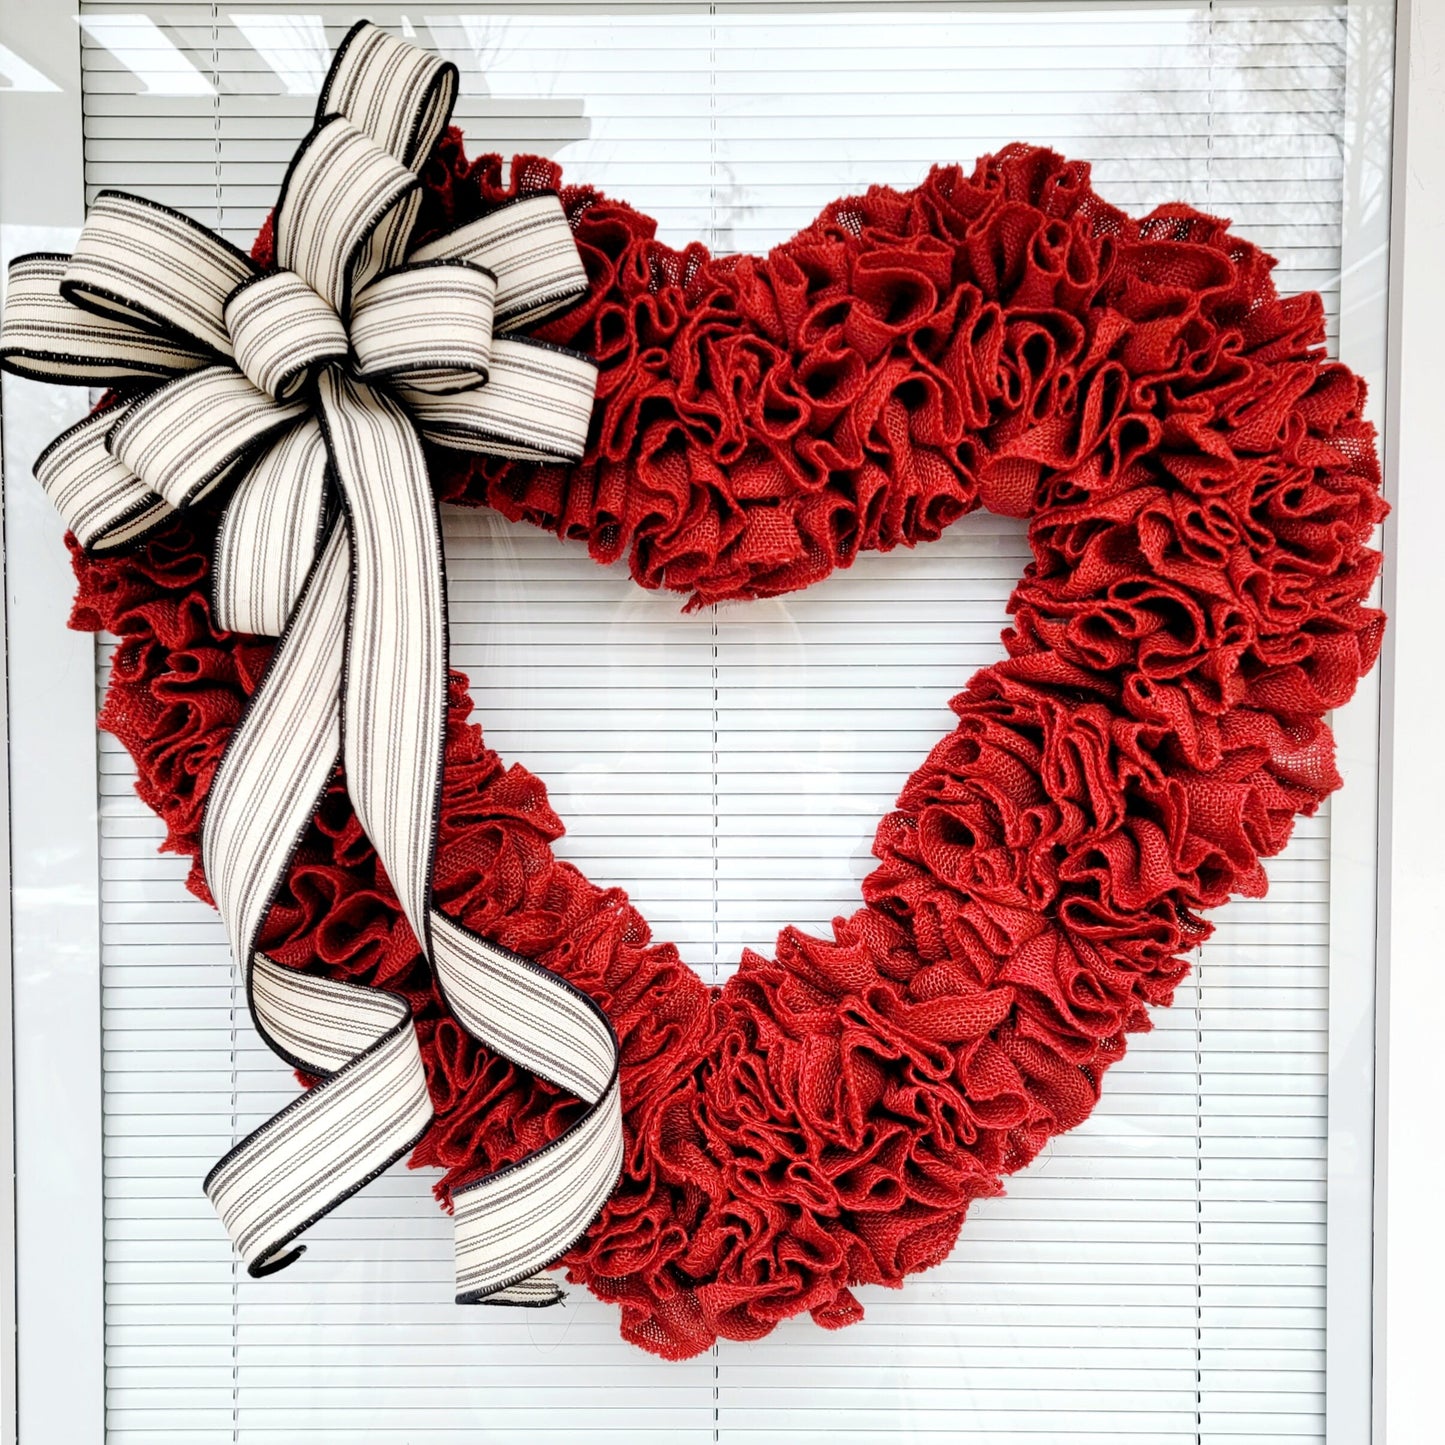 Red Heart Shaped Burlap Wreath with Bow